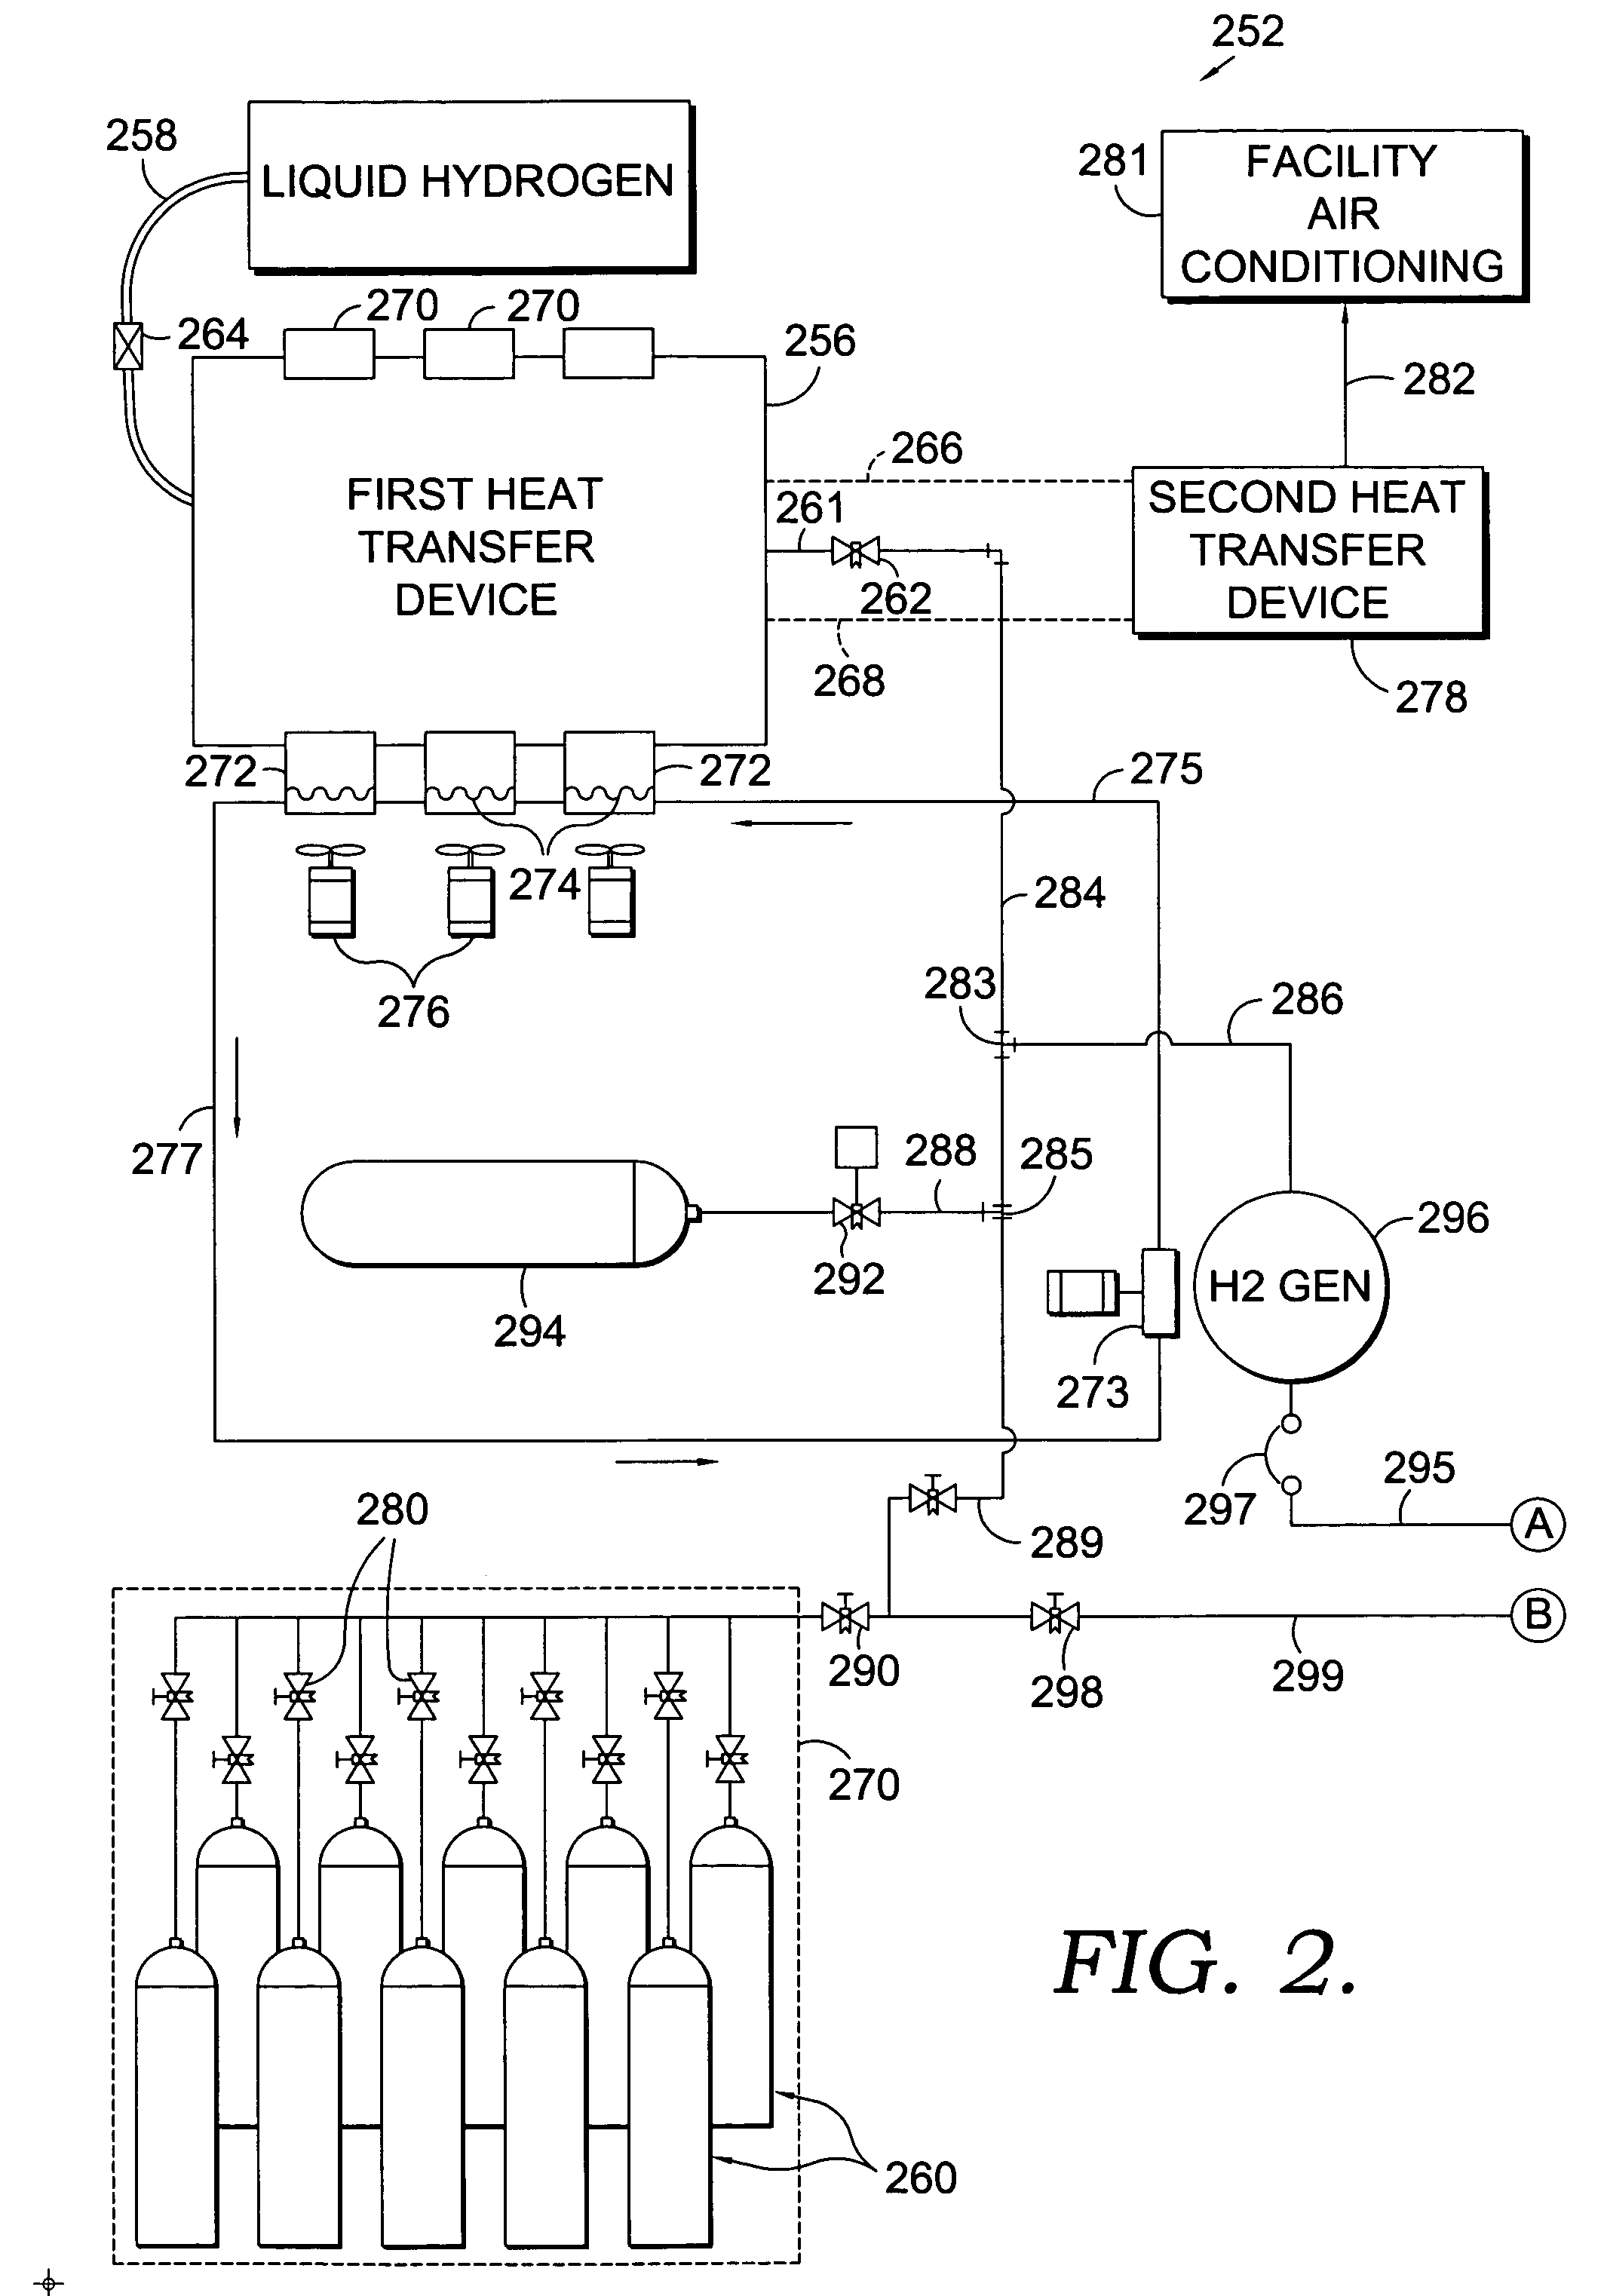 Fuel system used for cooling purposes